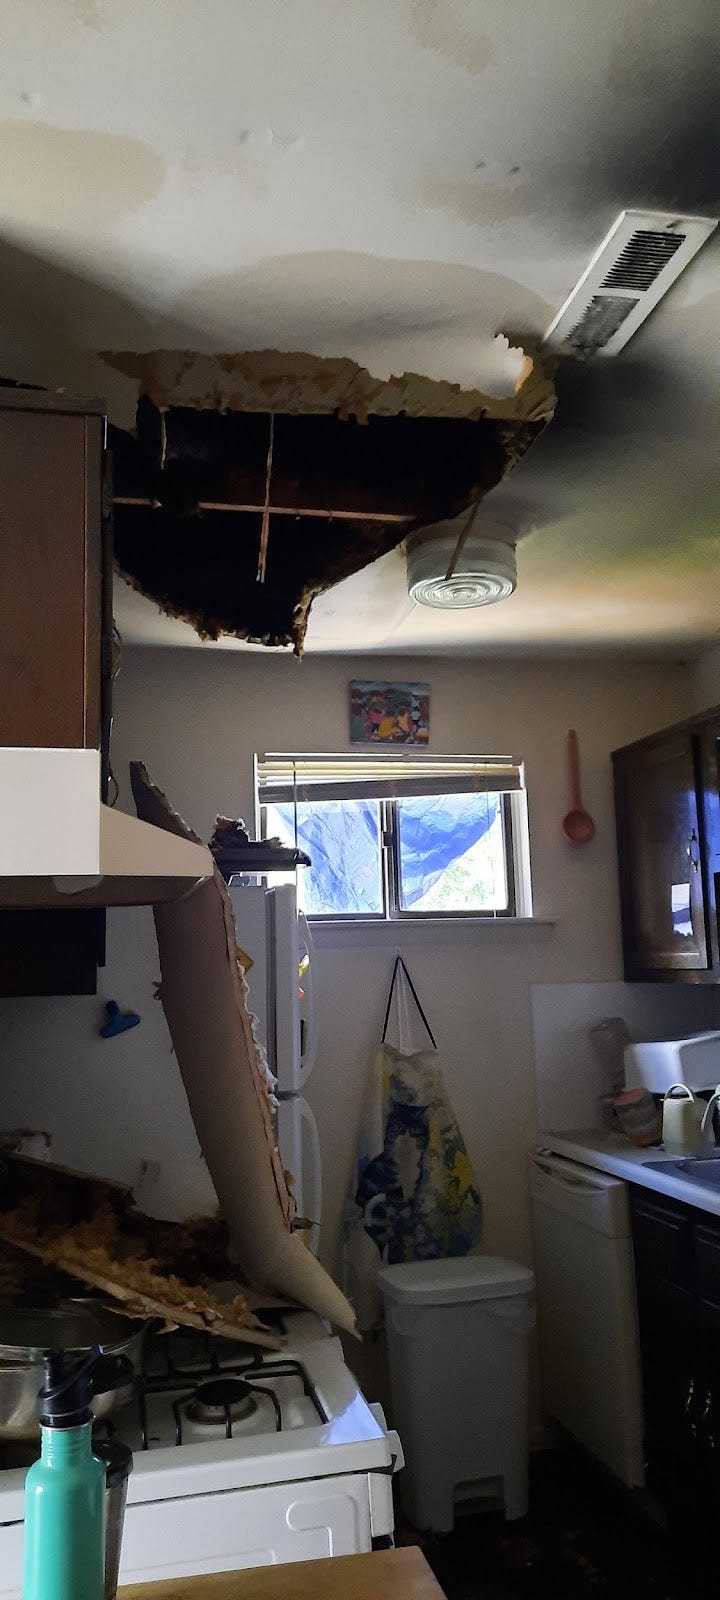 Hole in the ceiling and ceiling on the stove